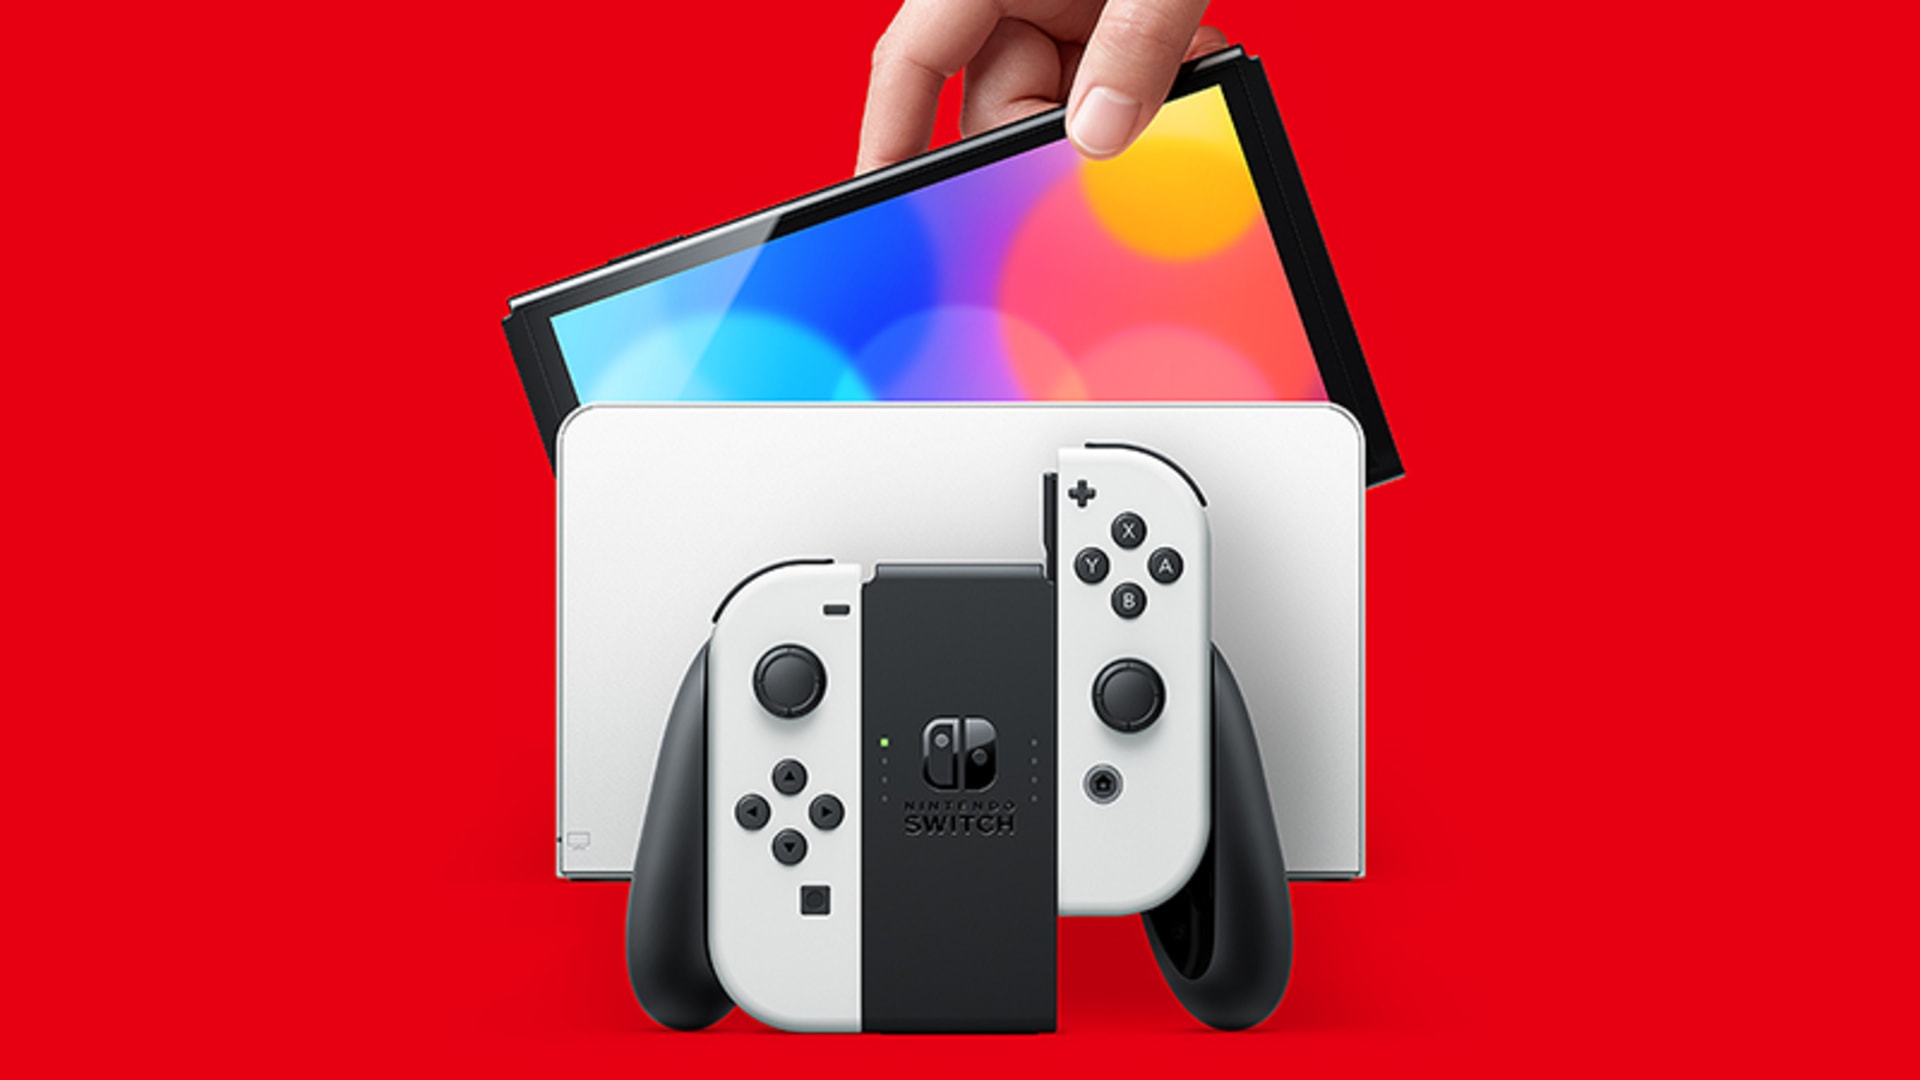 Nintendo Announces Nintendo Switch Oled Model With A Vibrant 7 Inch Oled Screen Launching Oct 8 Nintendo Official Site